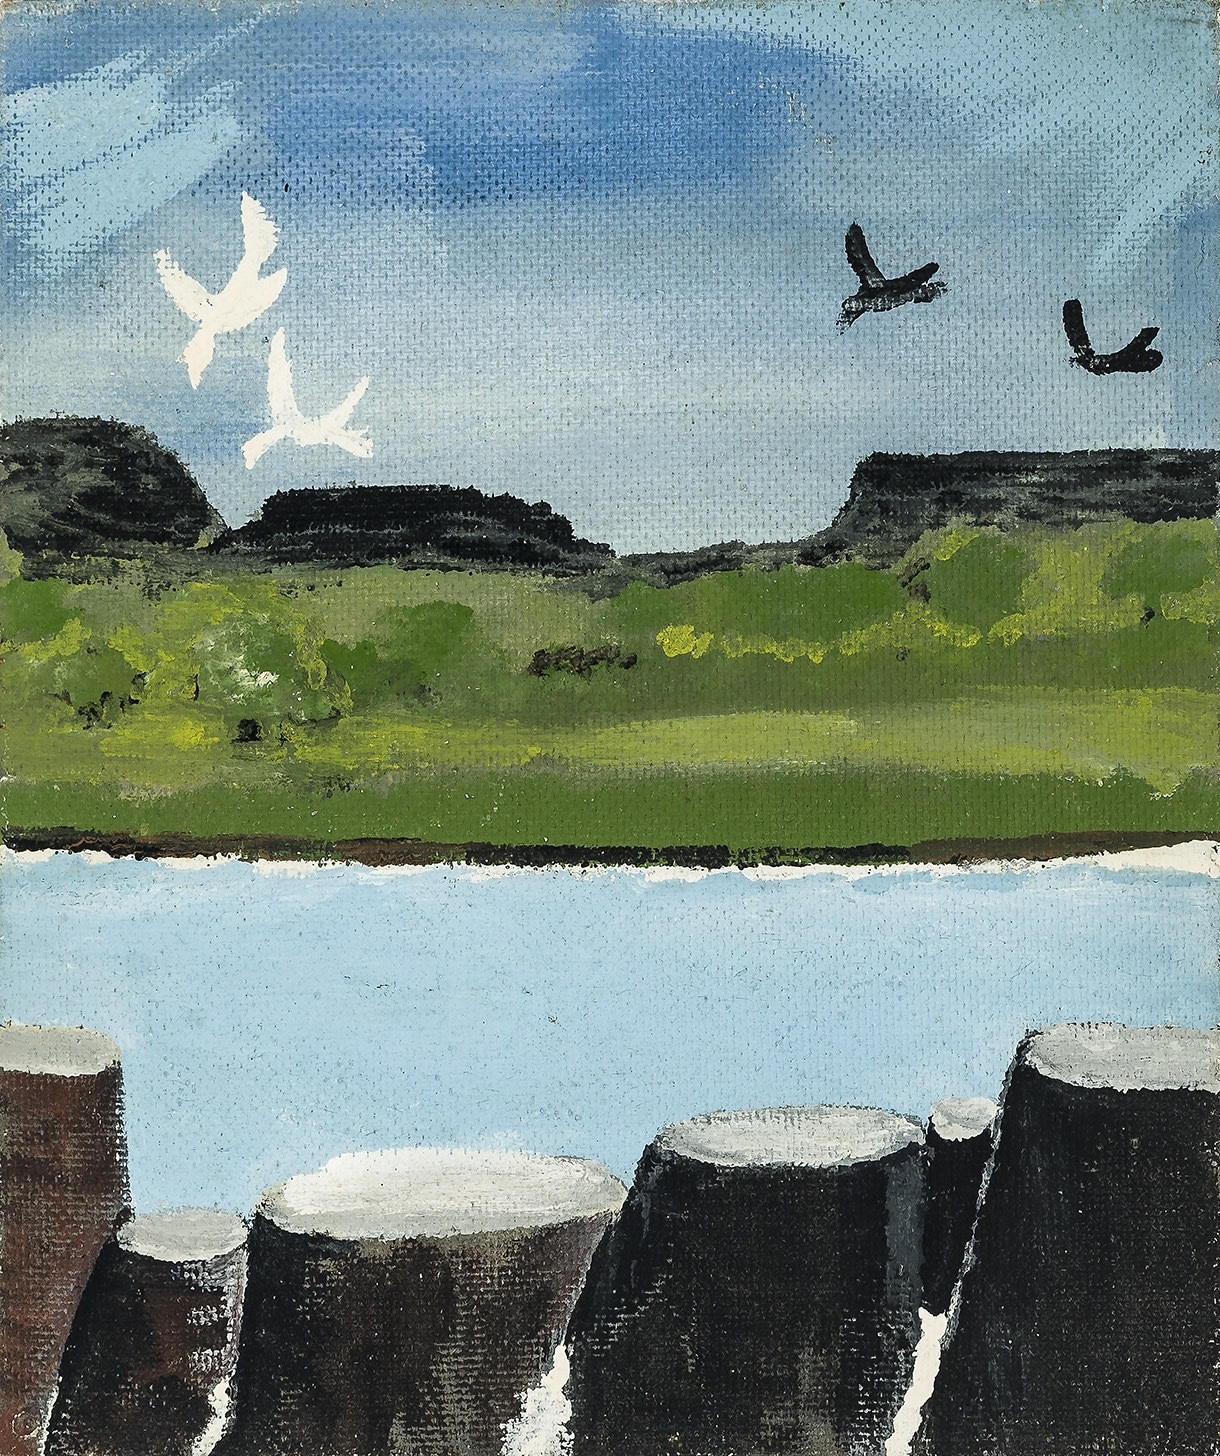 Coastal Landscape with Birds and Rocks or Pylons